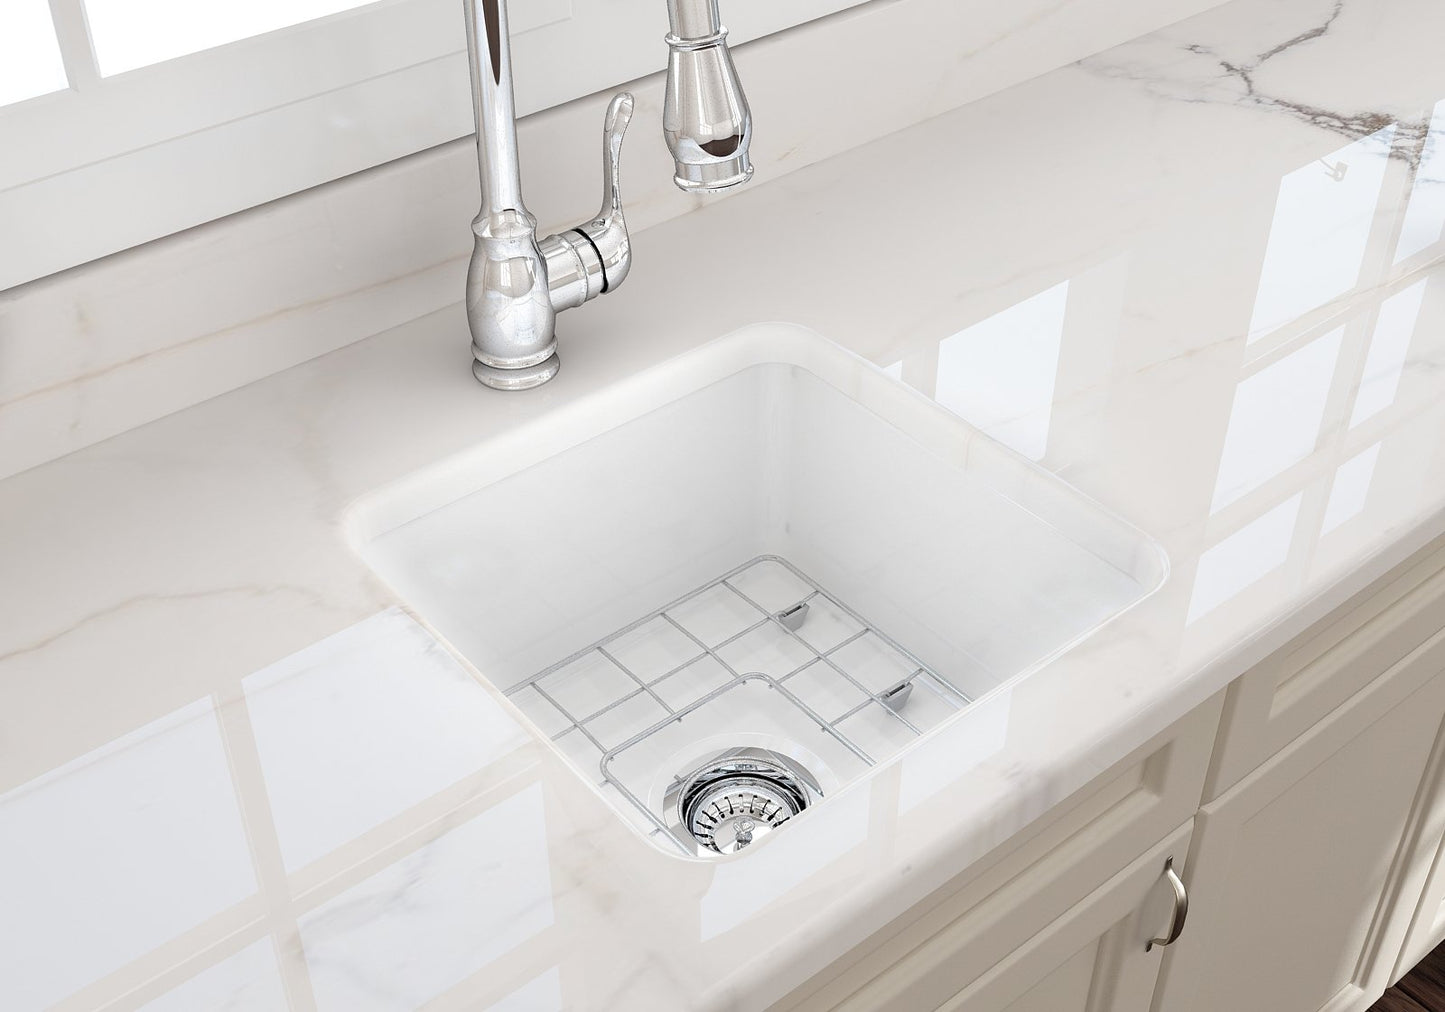 Bocchi Undermount Fireclay 18" Single Bowl Kitchen Sink (Call for special pricing)